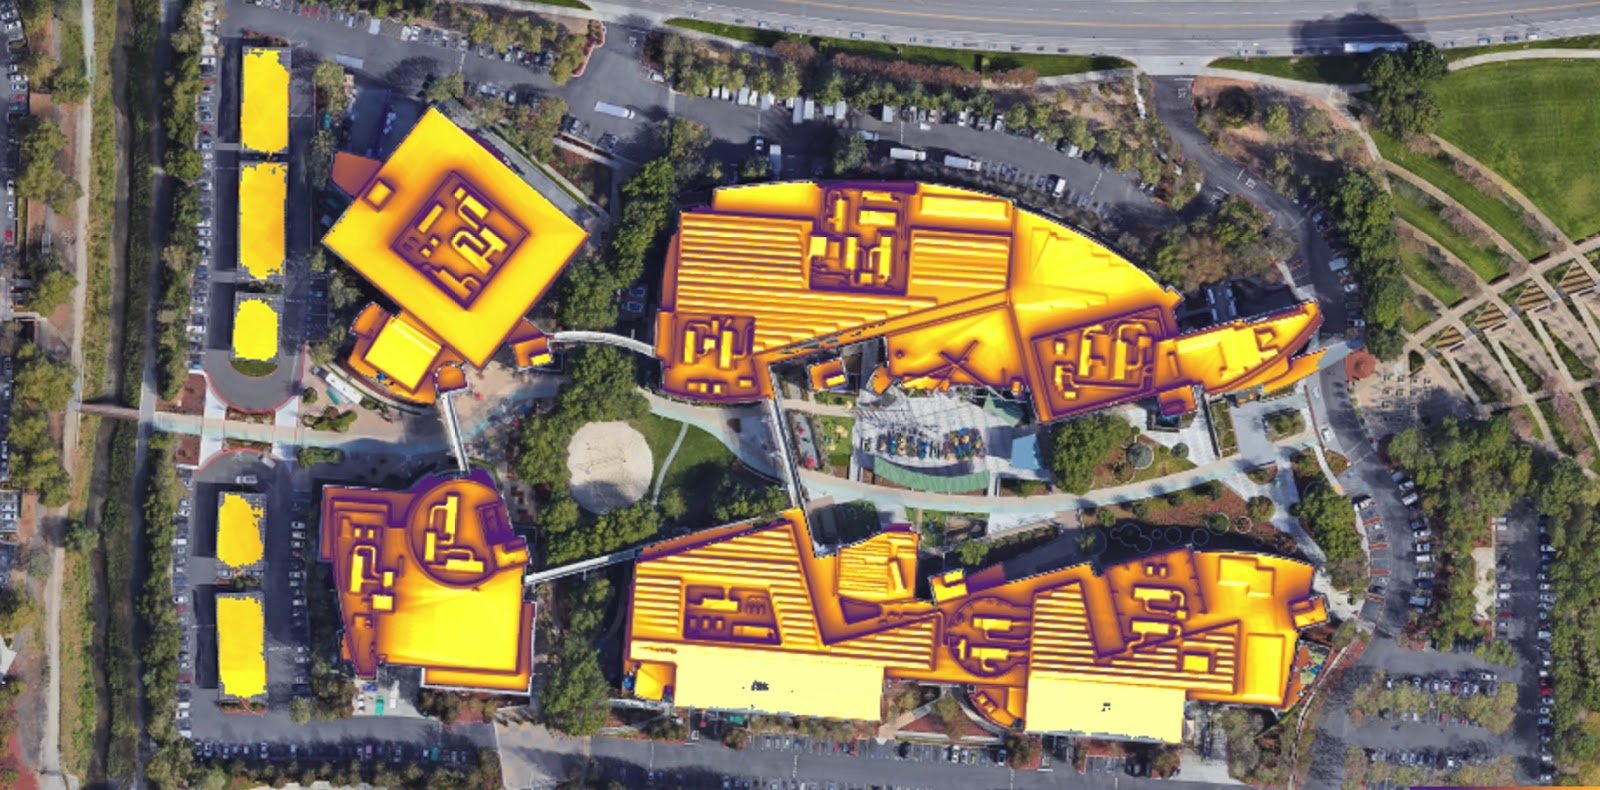 Google's Project Sunroof Data: 79% of US rooftops analyzed are viable for solar - is ...1600 x 790